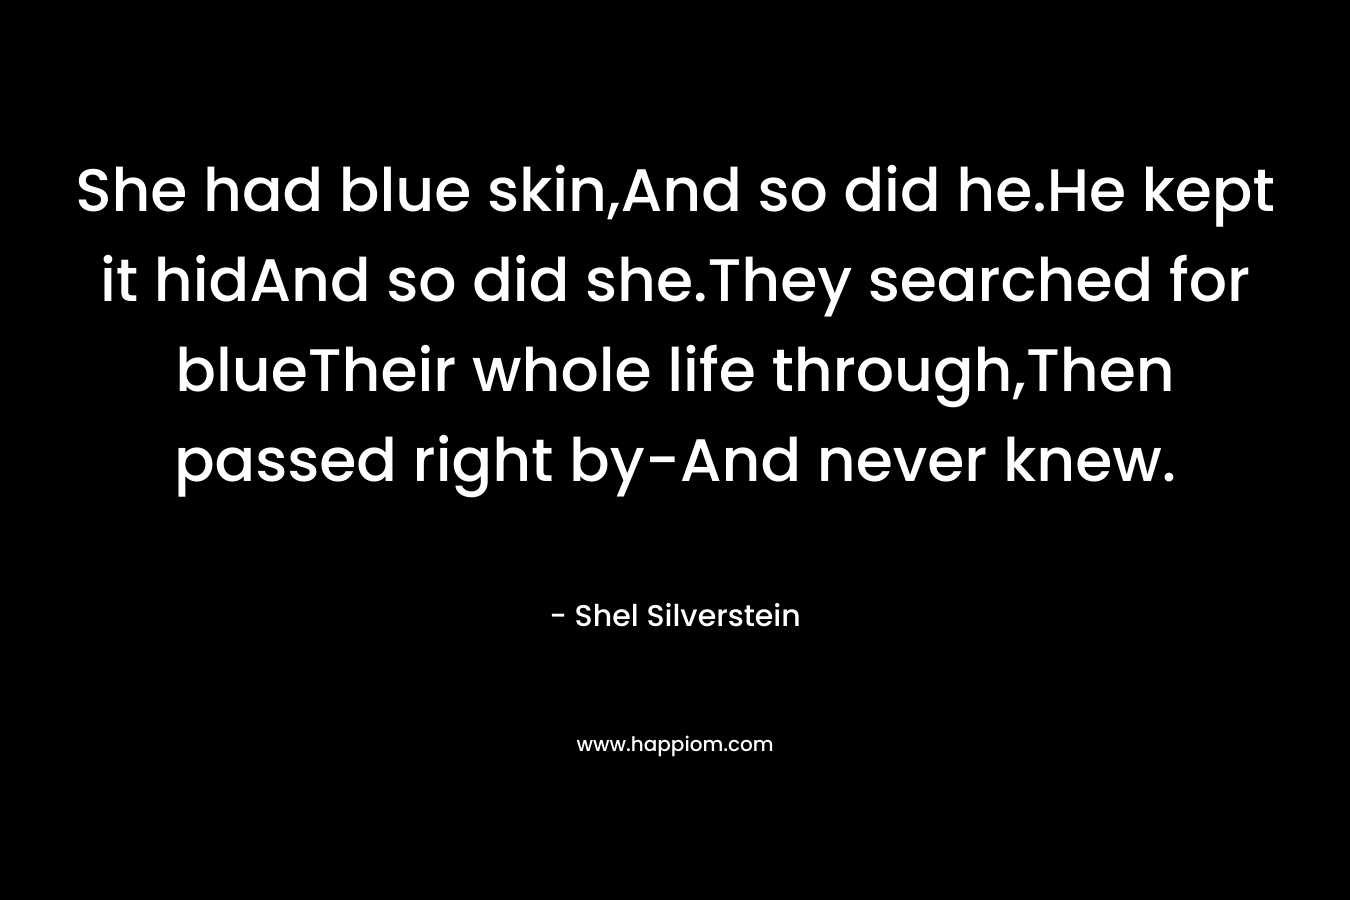 She had blue skin,And so did he.He kept it hidAnd so did she.They searched for blueTheir whole life through,Then passed right by-And never knew.